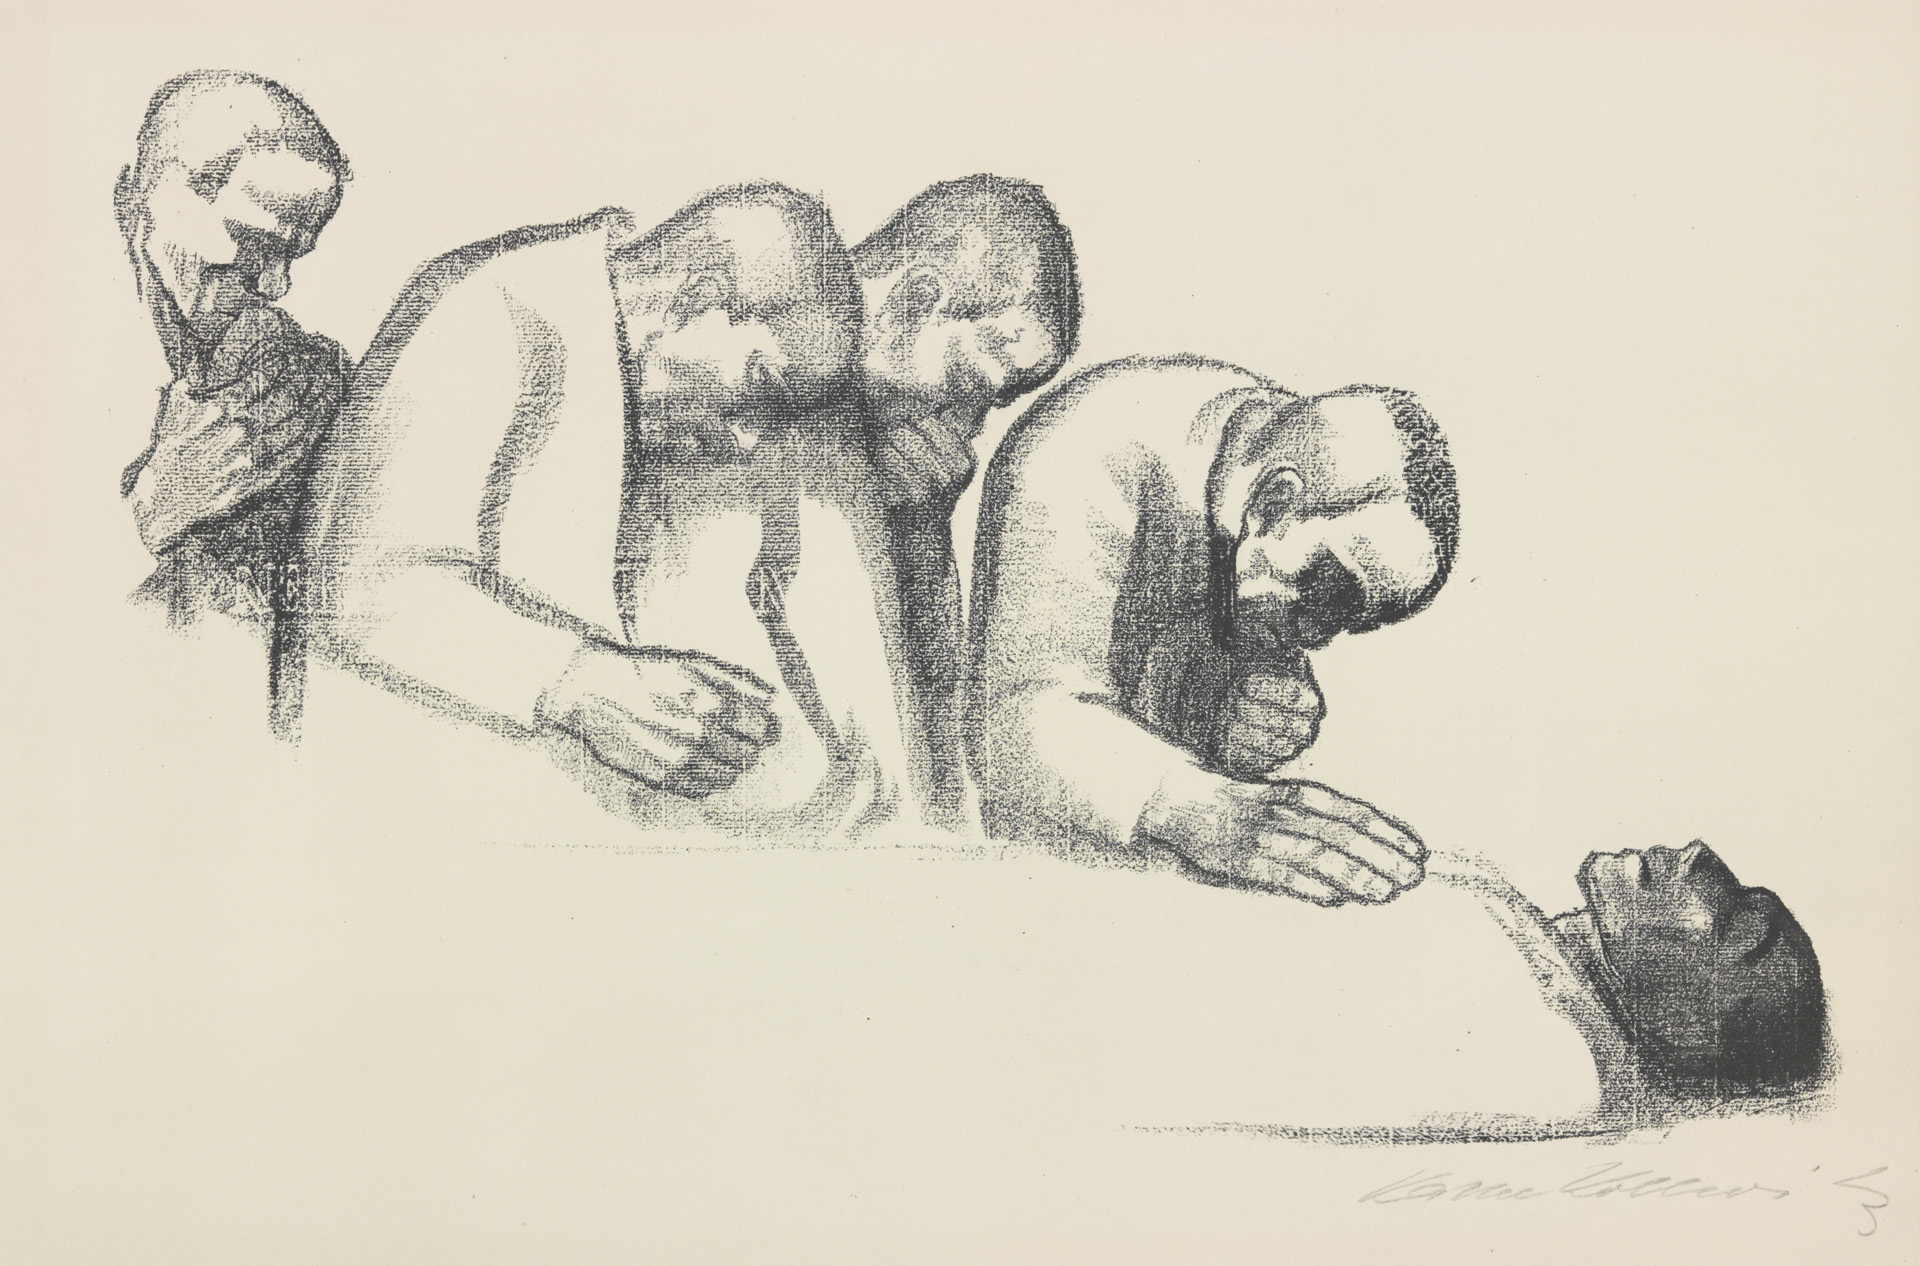 Käthe Kollwitz, In Memoriam Karl Liebknecht, rejected second version, 1919, crayon lithograph (transfer of drawing NT 779 on ribbed laid paper), Kn 146, Cologne Kollwitz Collection © Käthe Kollwitz Museum Köln